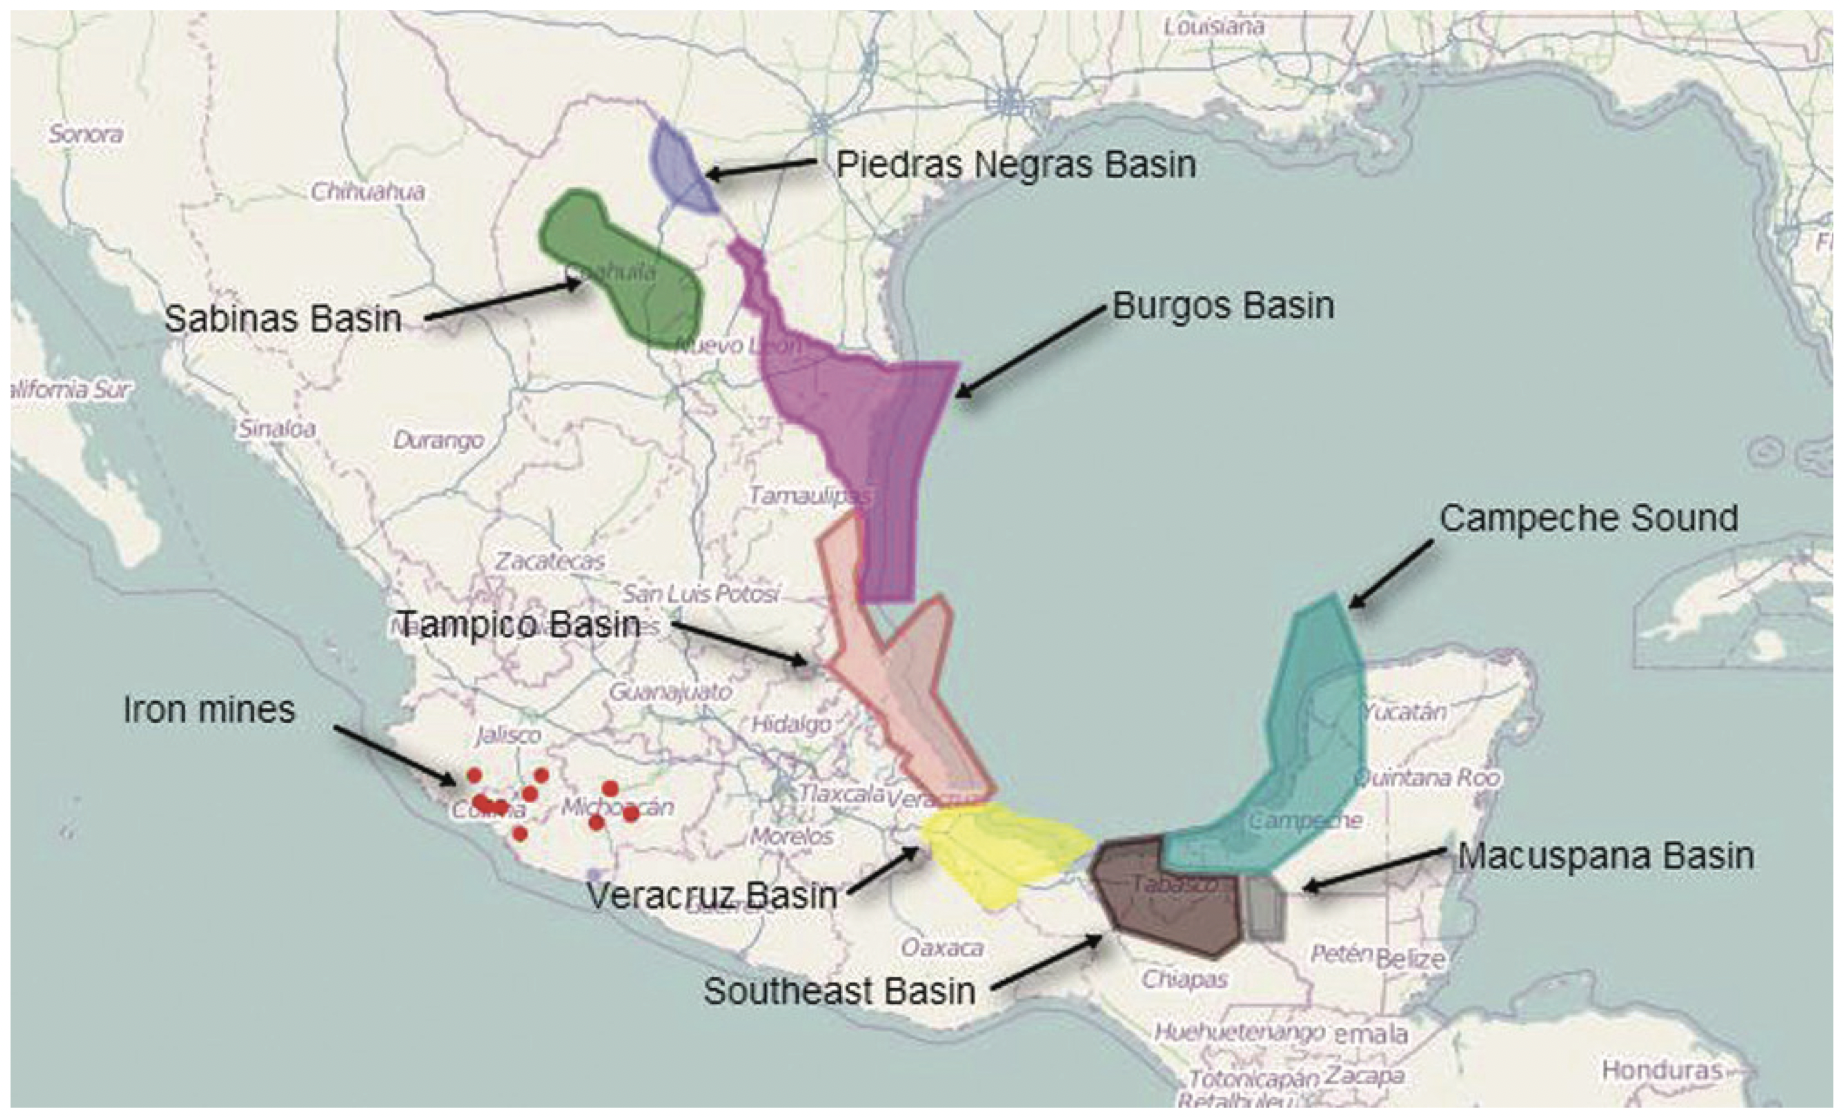 This map shows the locations of major energy development projects in Mexico.